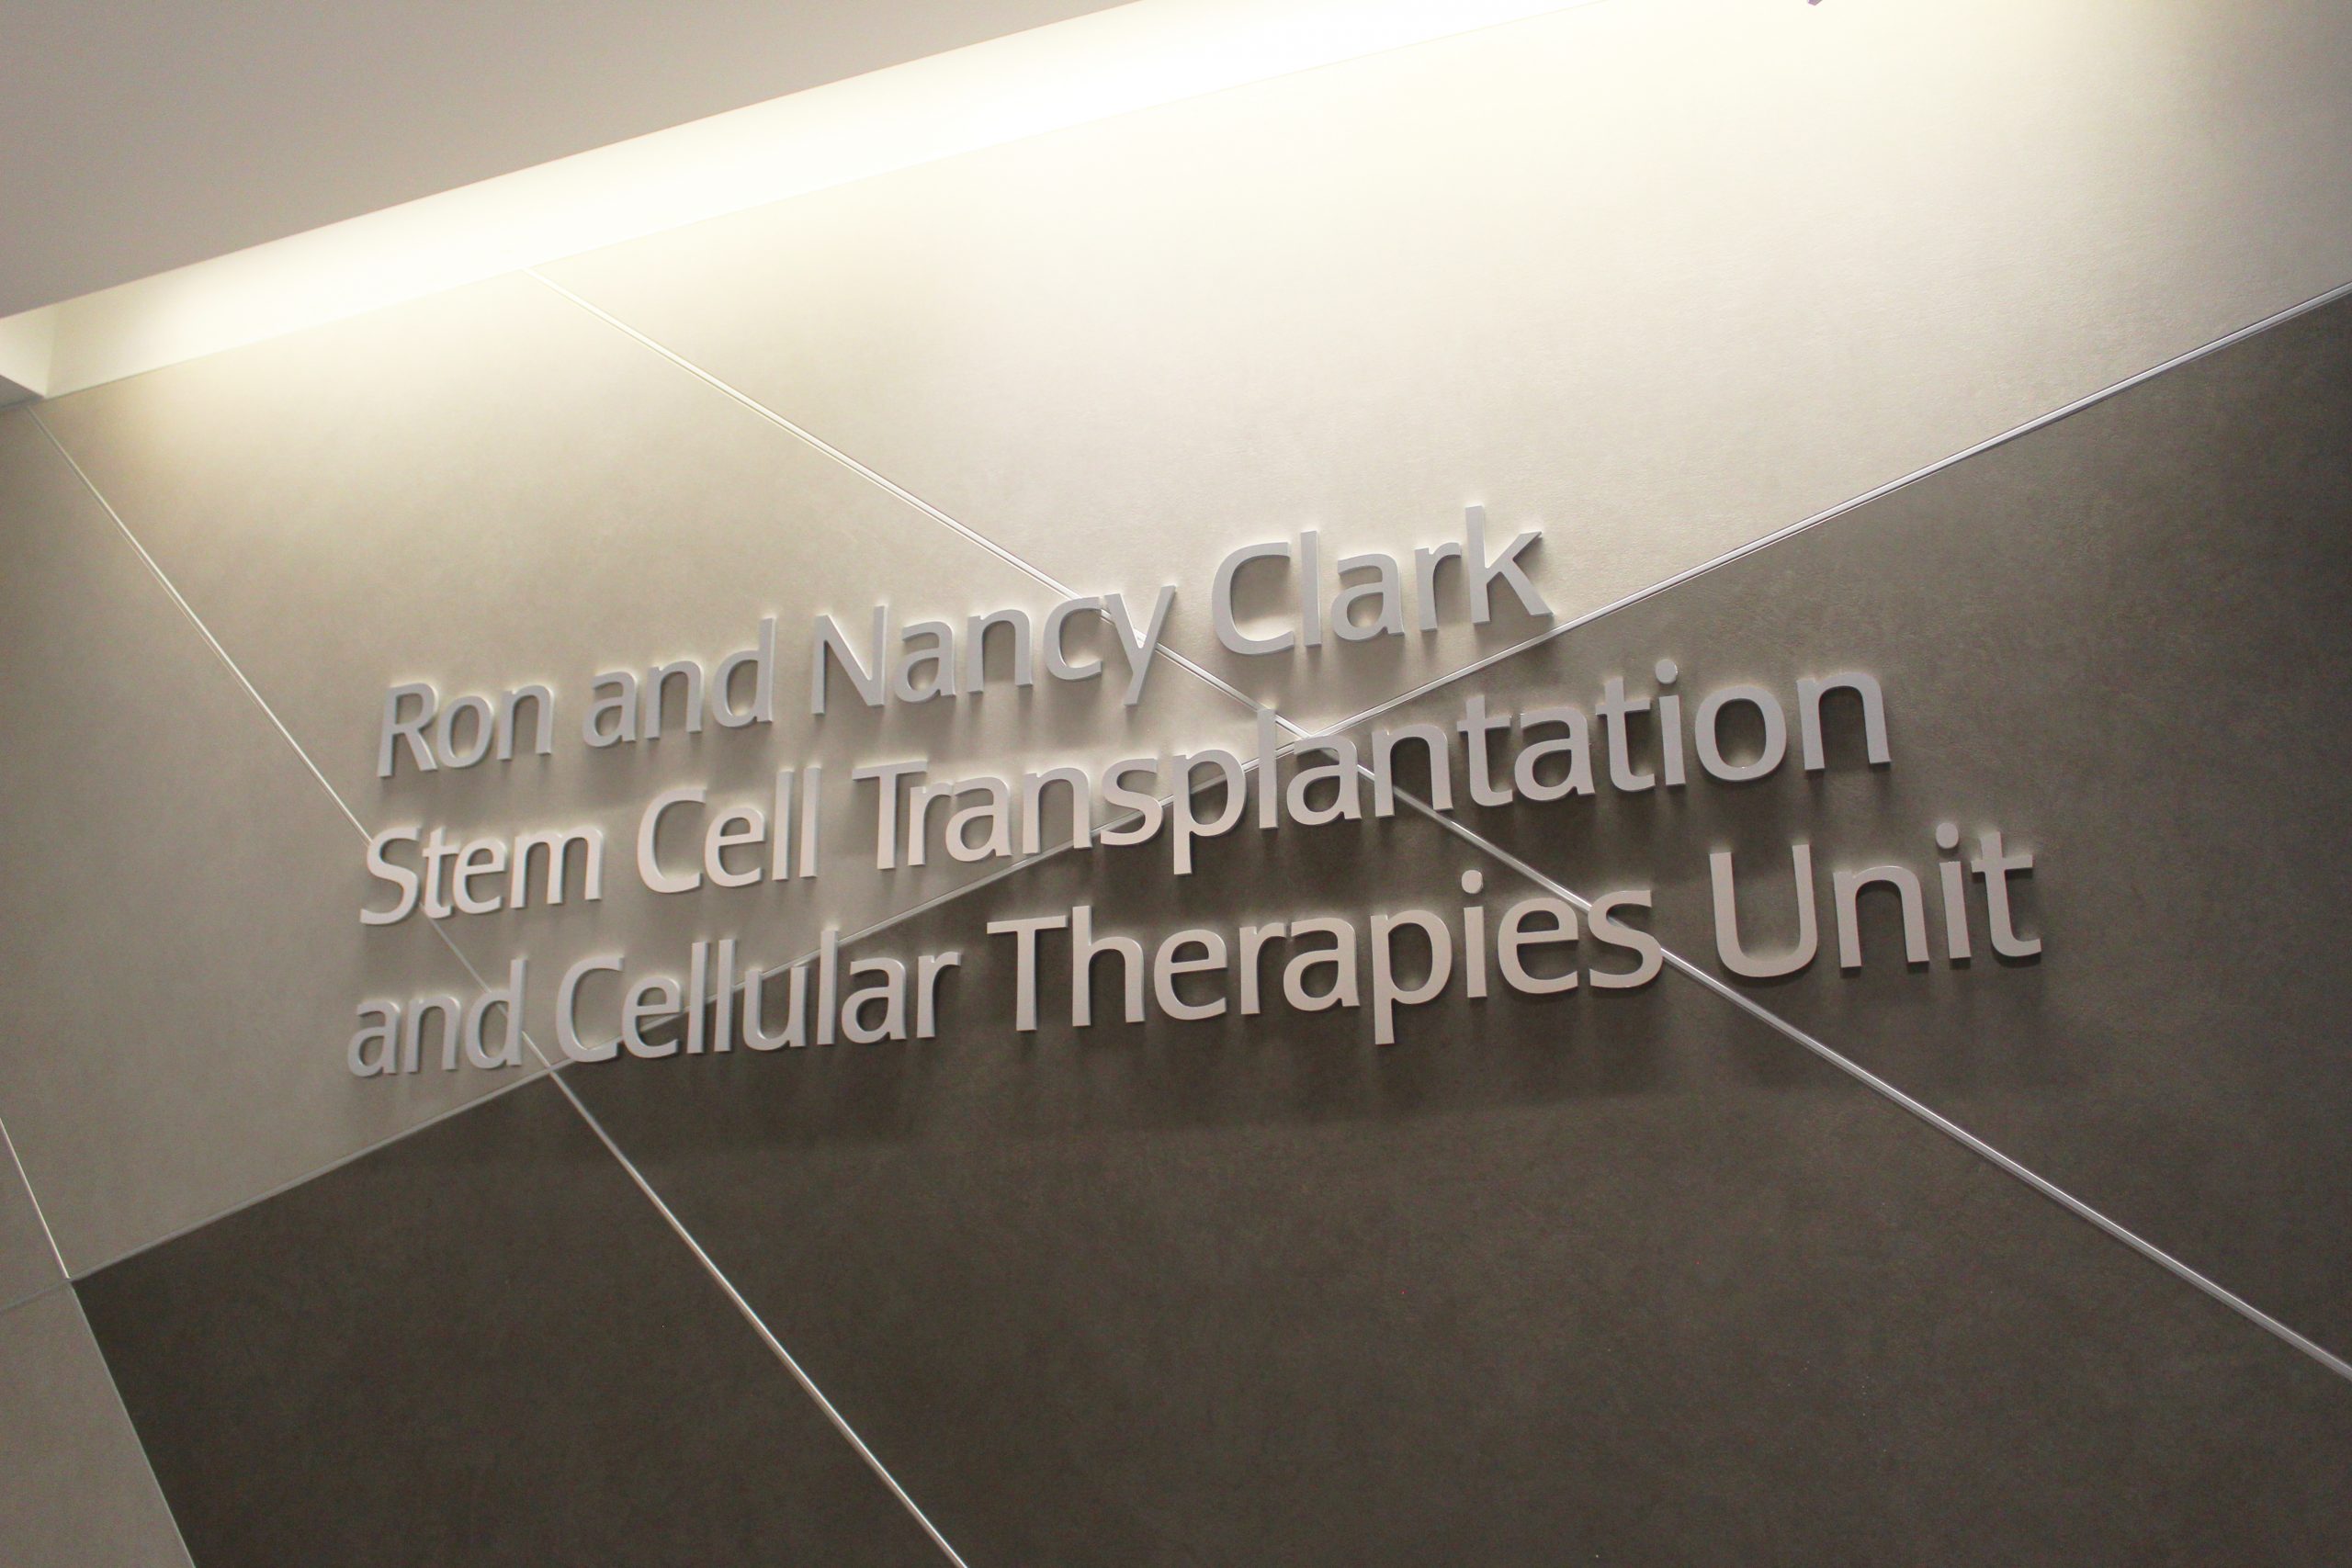 signage for the new Ron and Nancy Clark Stem Cell Transplantation and Cellular Therapies Unit